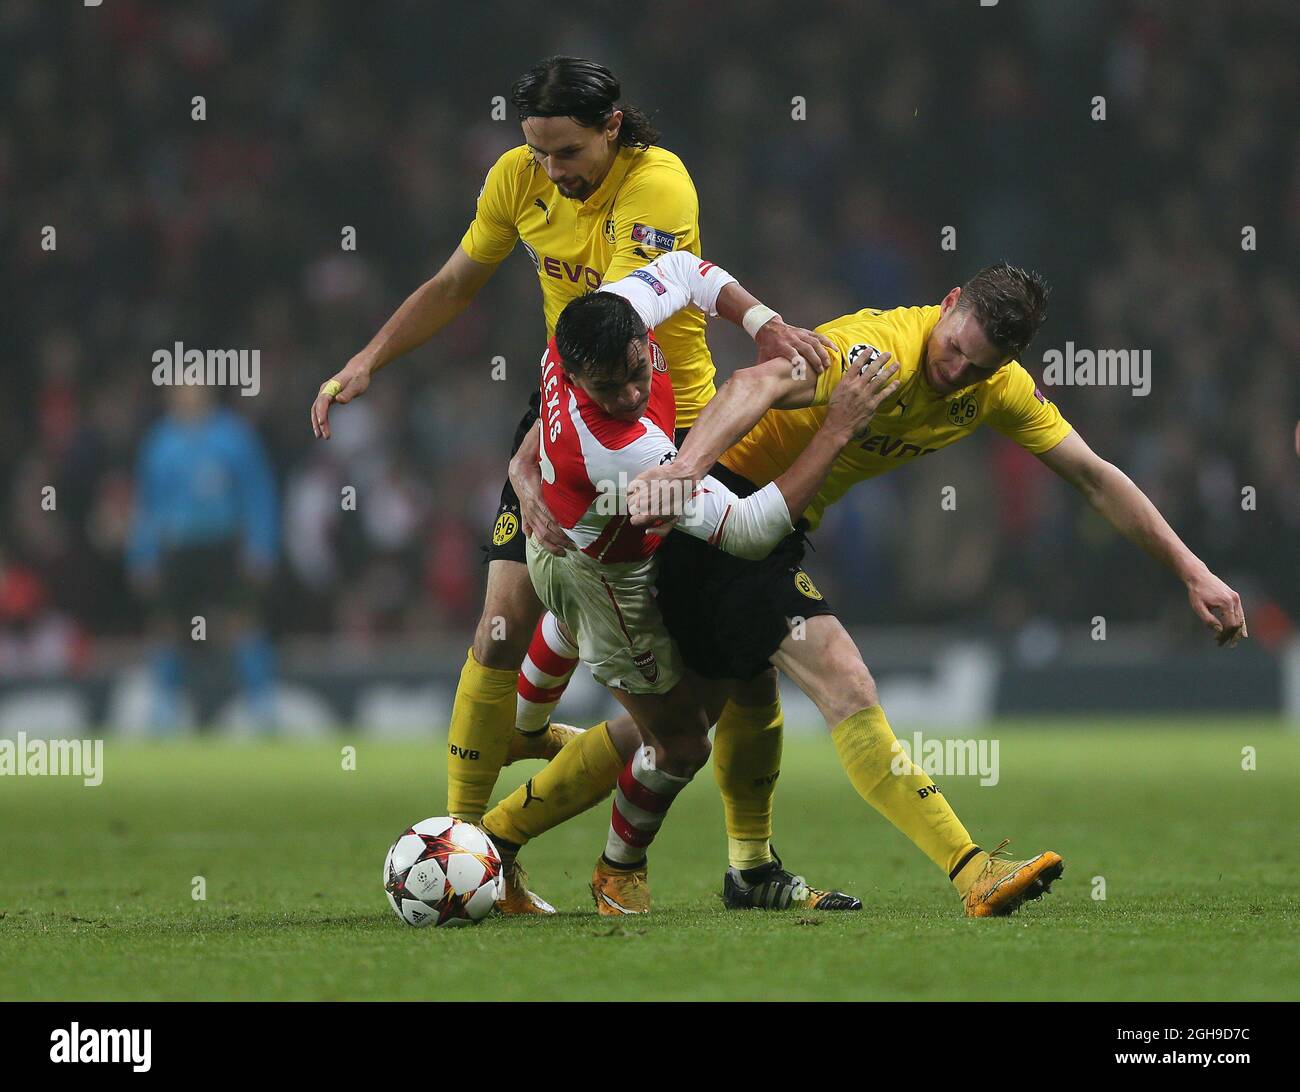 Arsenal's Alexis Sanchez tussles with Dortmund's Neven Subotic and Kevin Grosskreutz during the UEFA Champions League between Arsenal and Borussia Dortmund in Emirates Stadium, England on 26th November 2014. David Klein/ Stock Photo